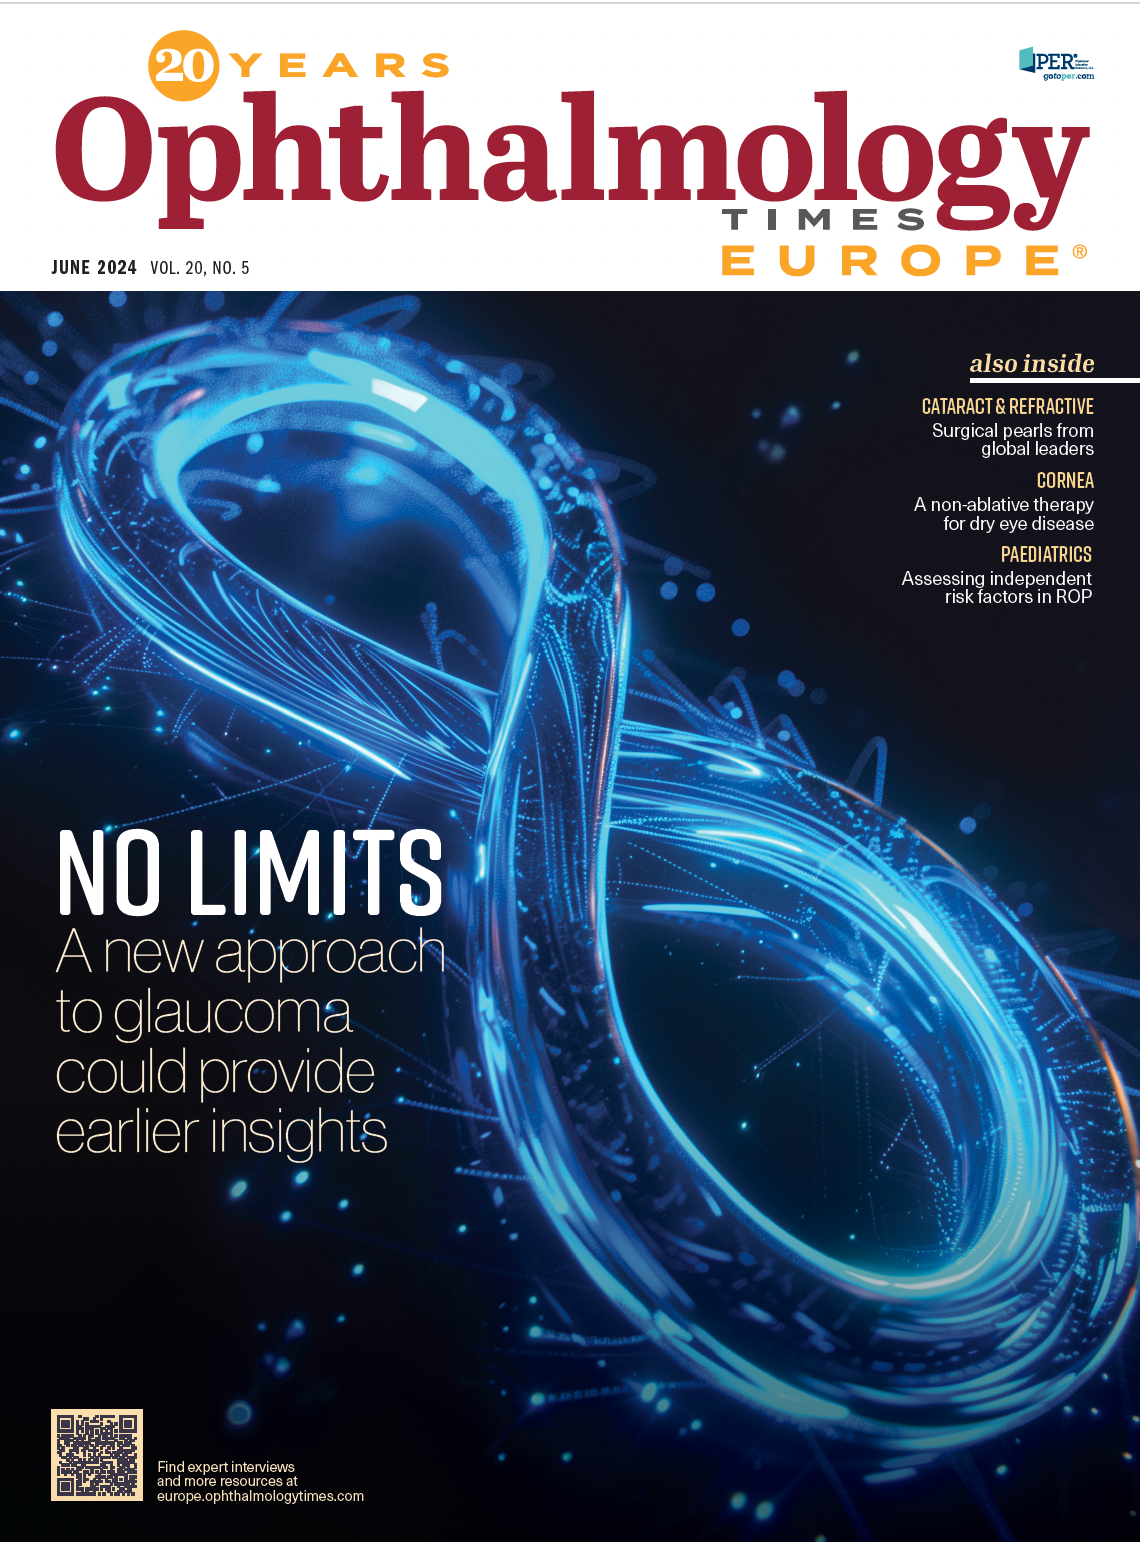 The cover of Ophthalmology Times Europe June 2024. An infinity symbol is on the cover, and the headline text reads, "NO LIMITS A new approach to glaucoma could provide earlier insights."